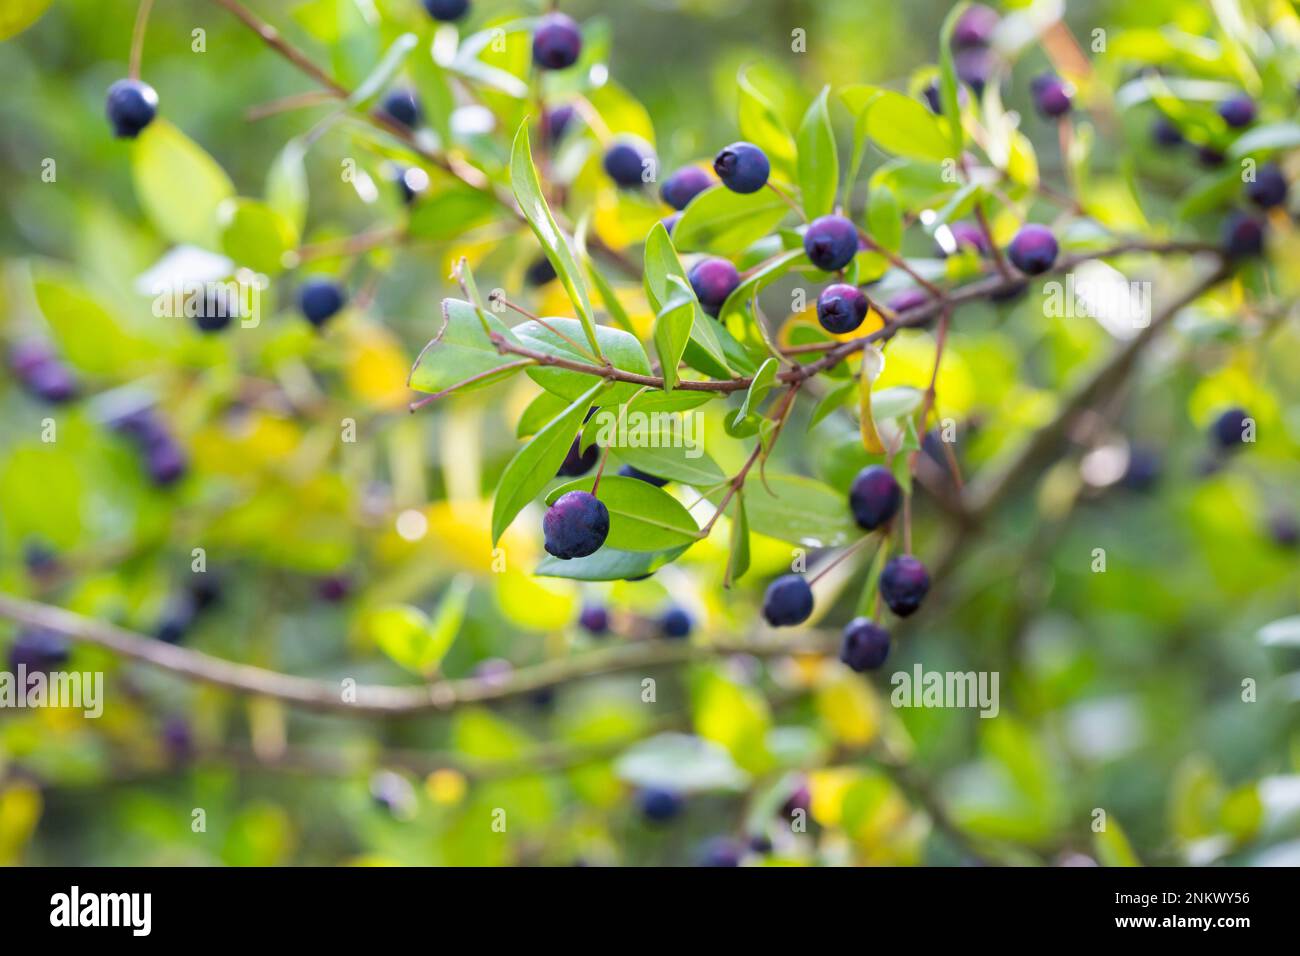 Detail of a myrtle bush with berries in autumn selective focus, natural background Stock Photo